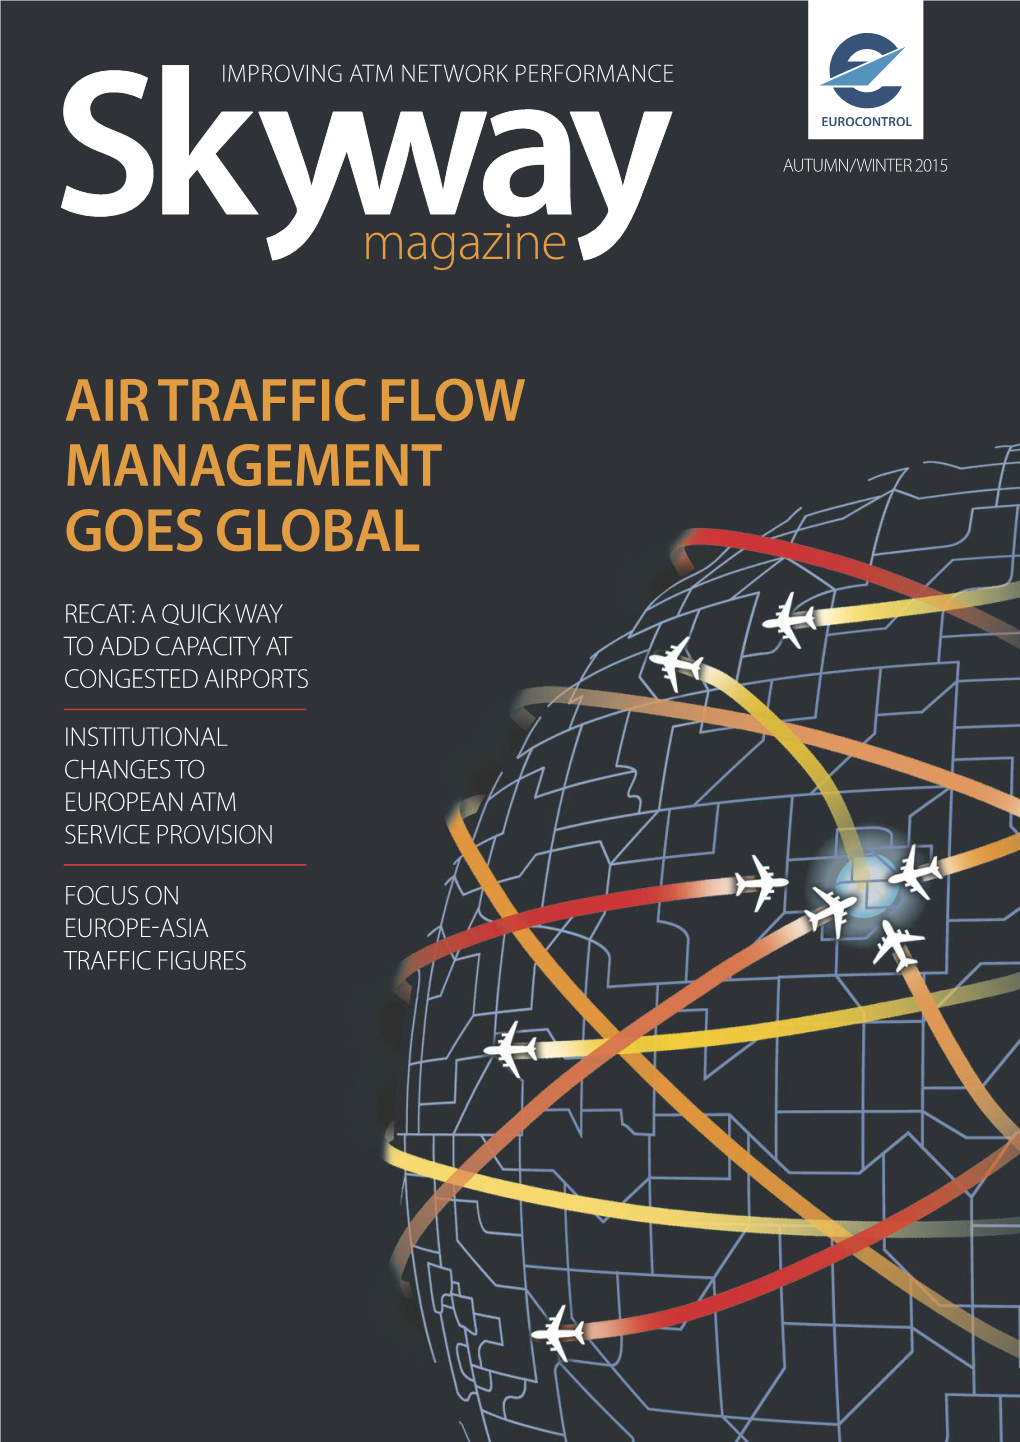 Air Traffic Flow Management Goes Global